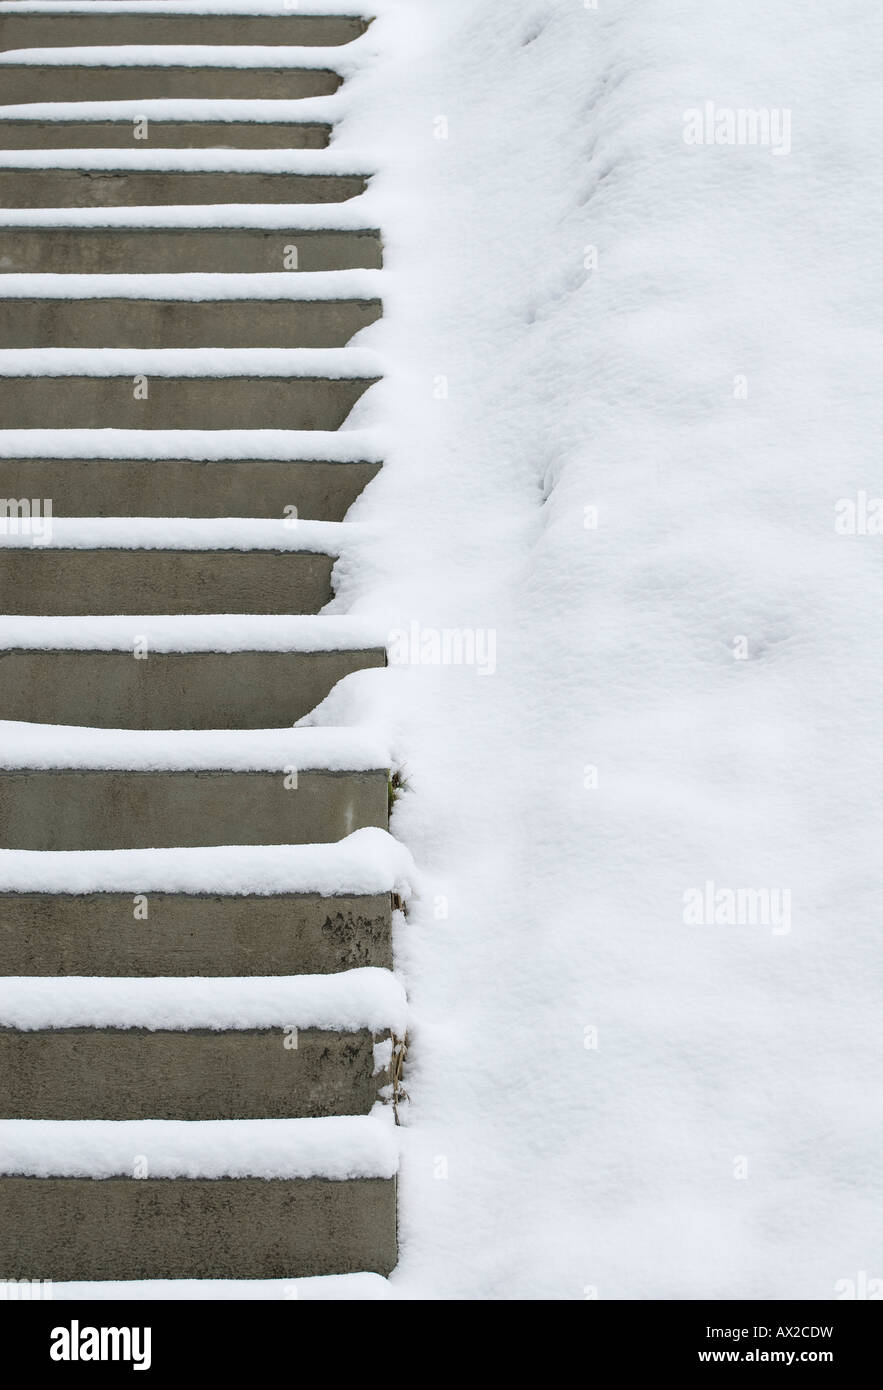 concrete steps covered in snow, chatel, france Stock Photo